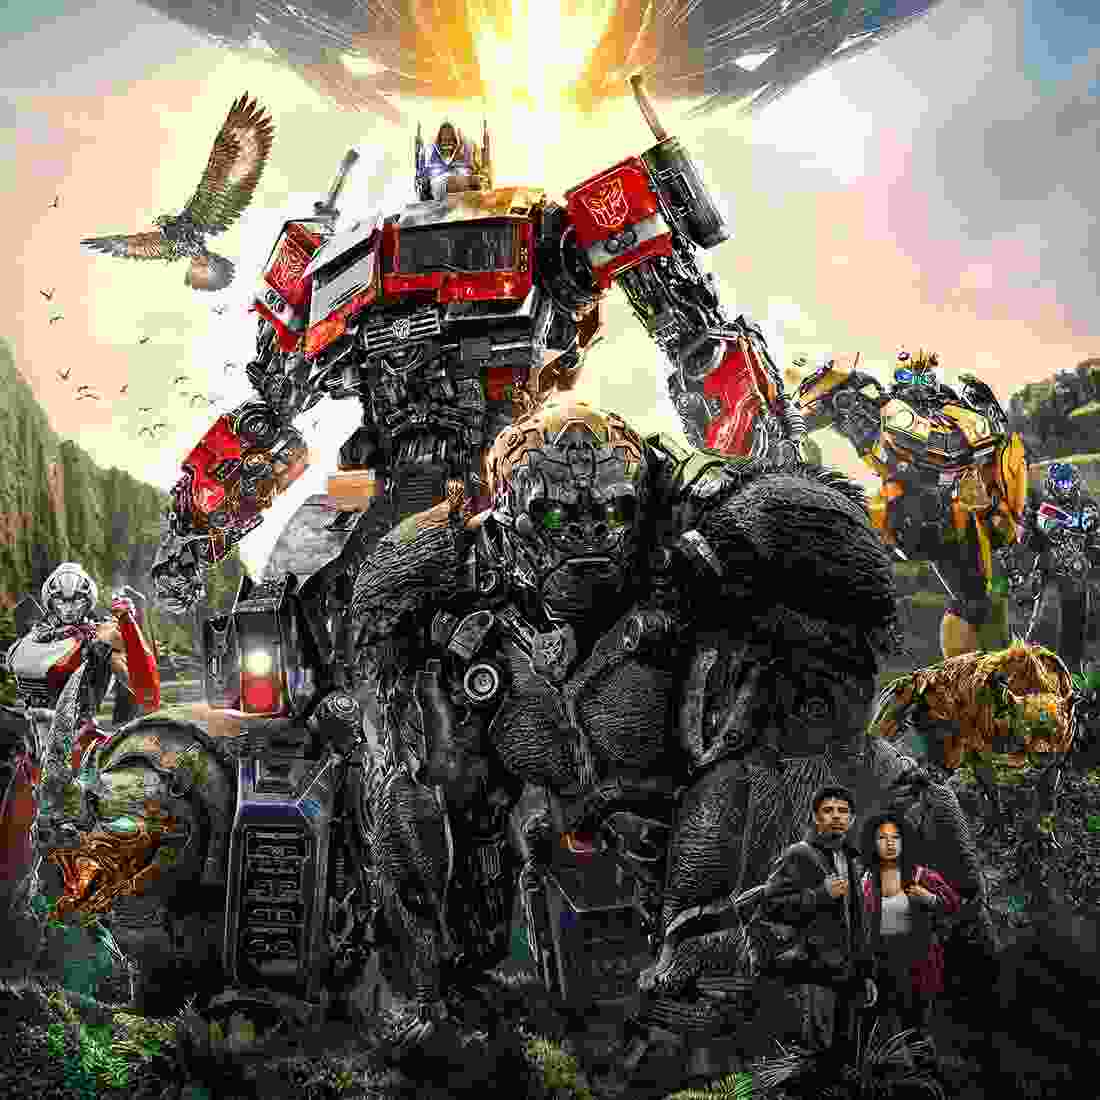 transformers-rise-of-the-beast-movies